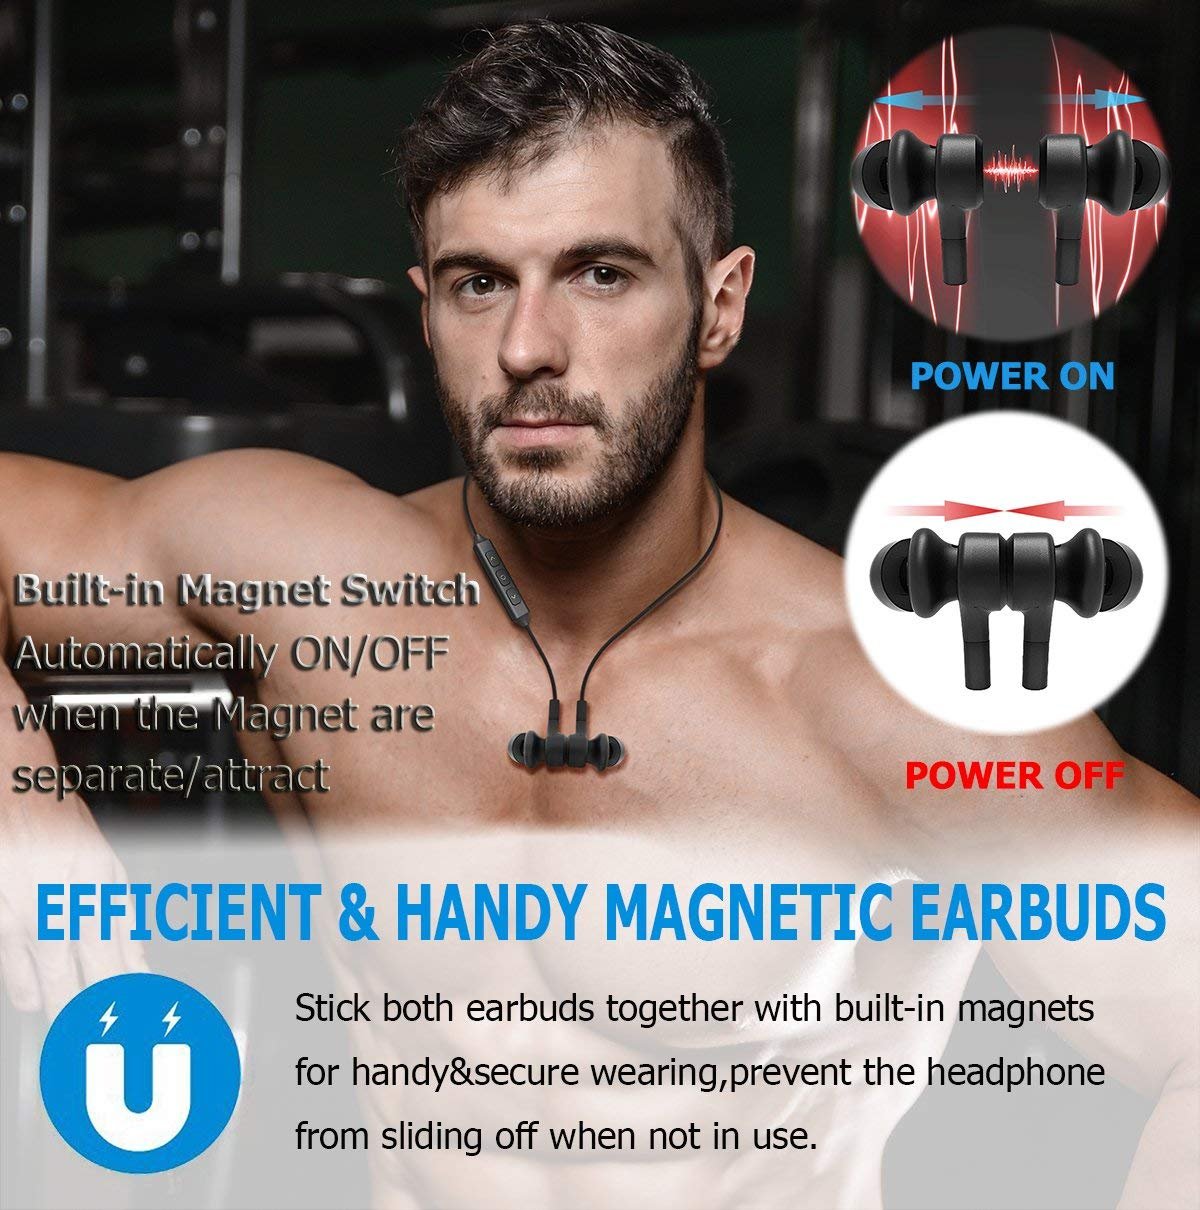 Wireless Sport Earphones with Magnetic Controlled Switch In Red